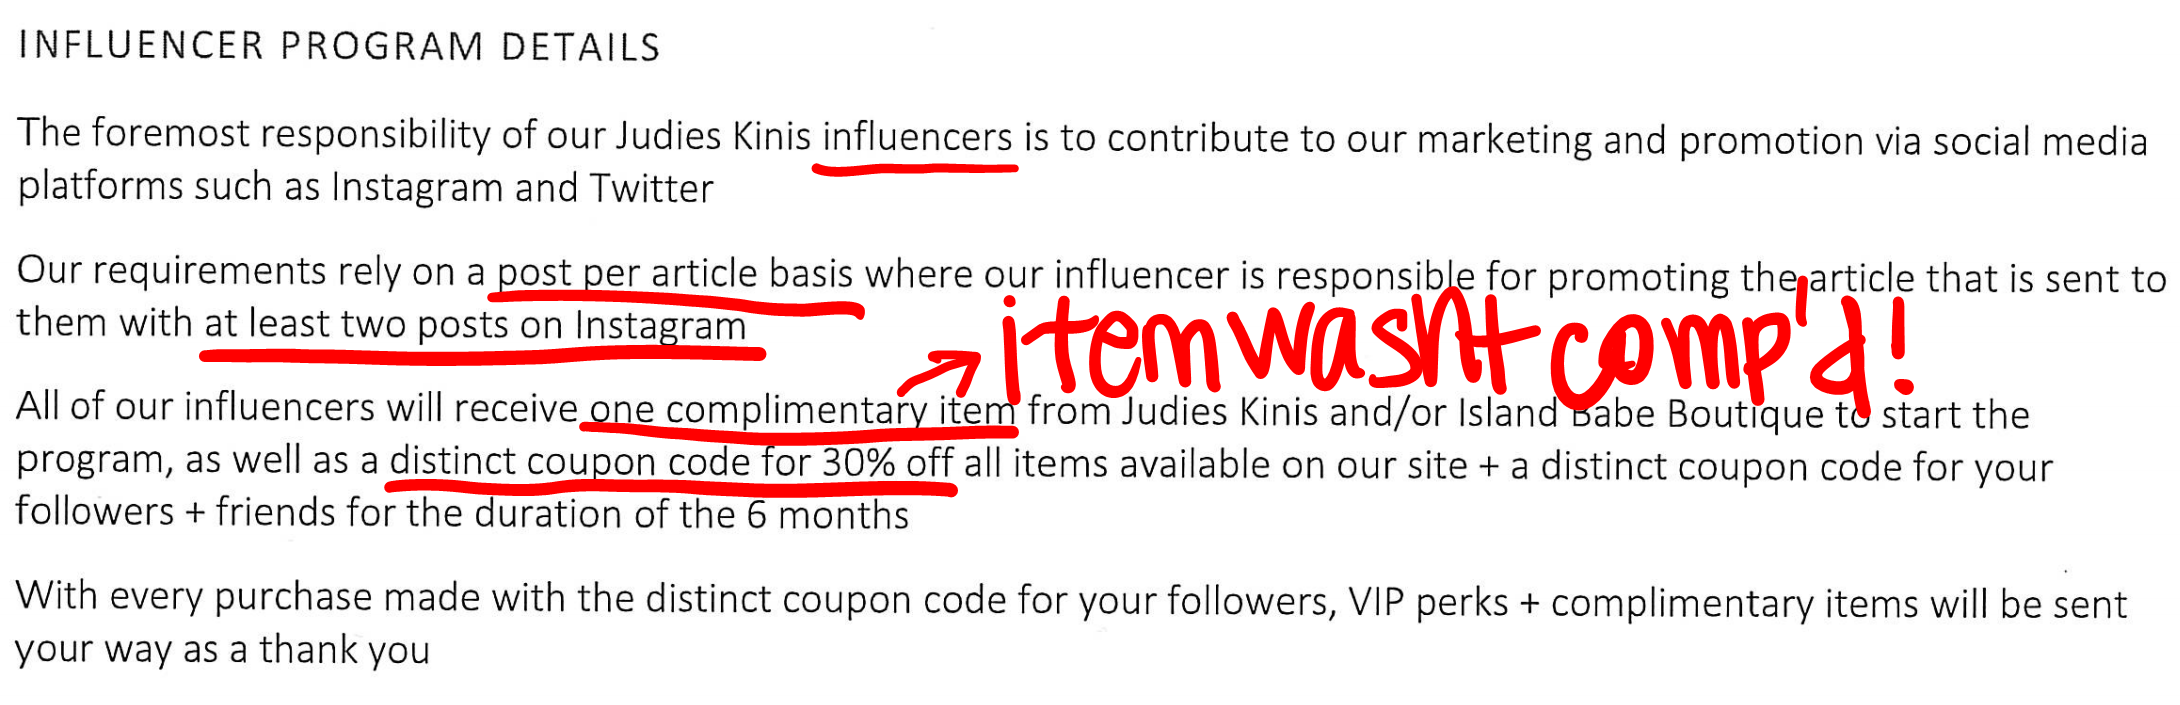 They Ask You to Buy the Product Upfront with their Discount influencer scams